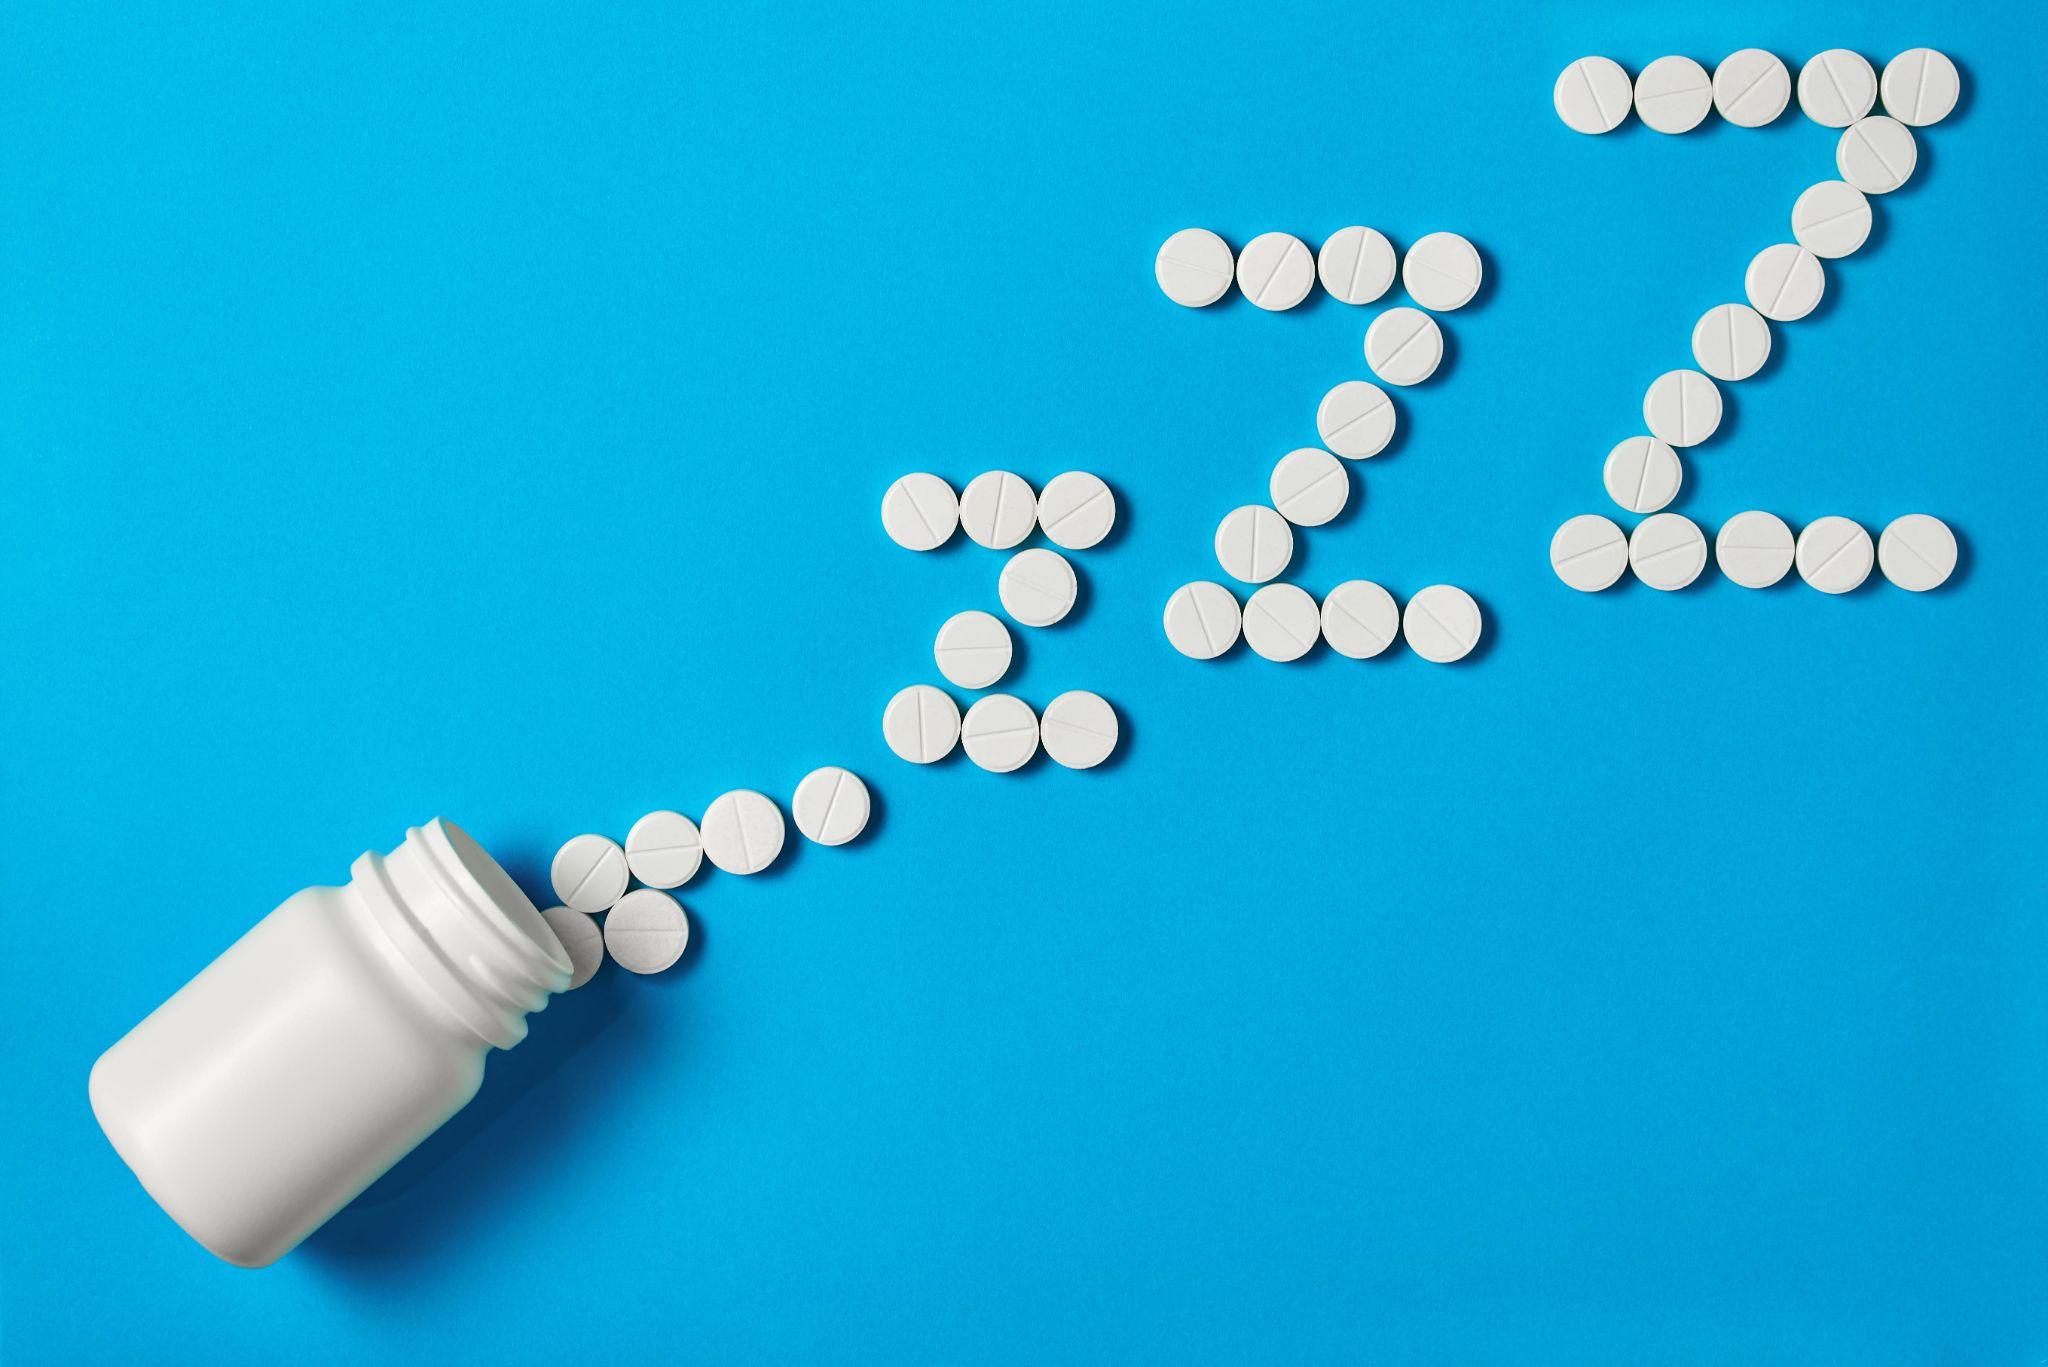 sleeping pills in the form of z-z-z are scattered from a die